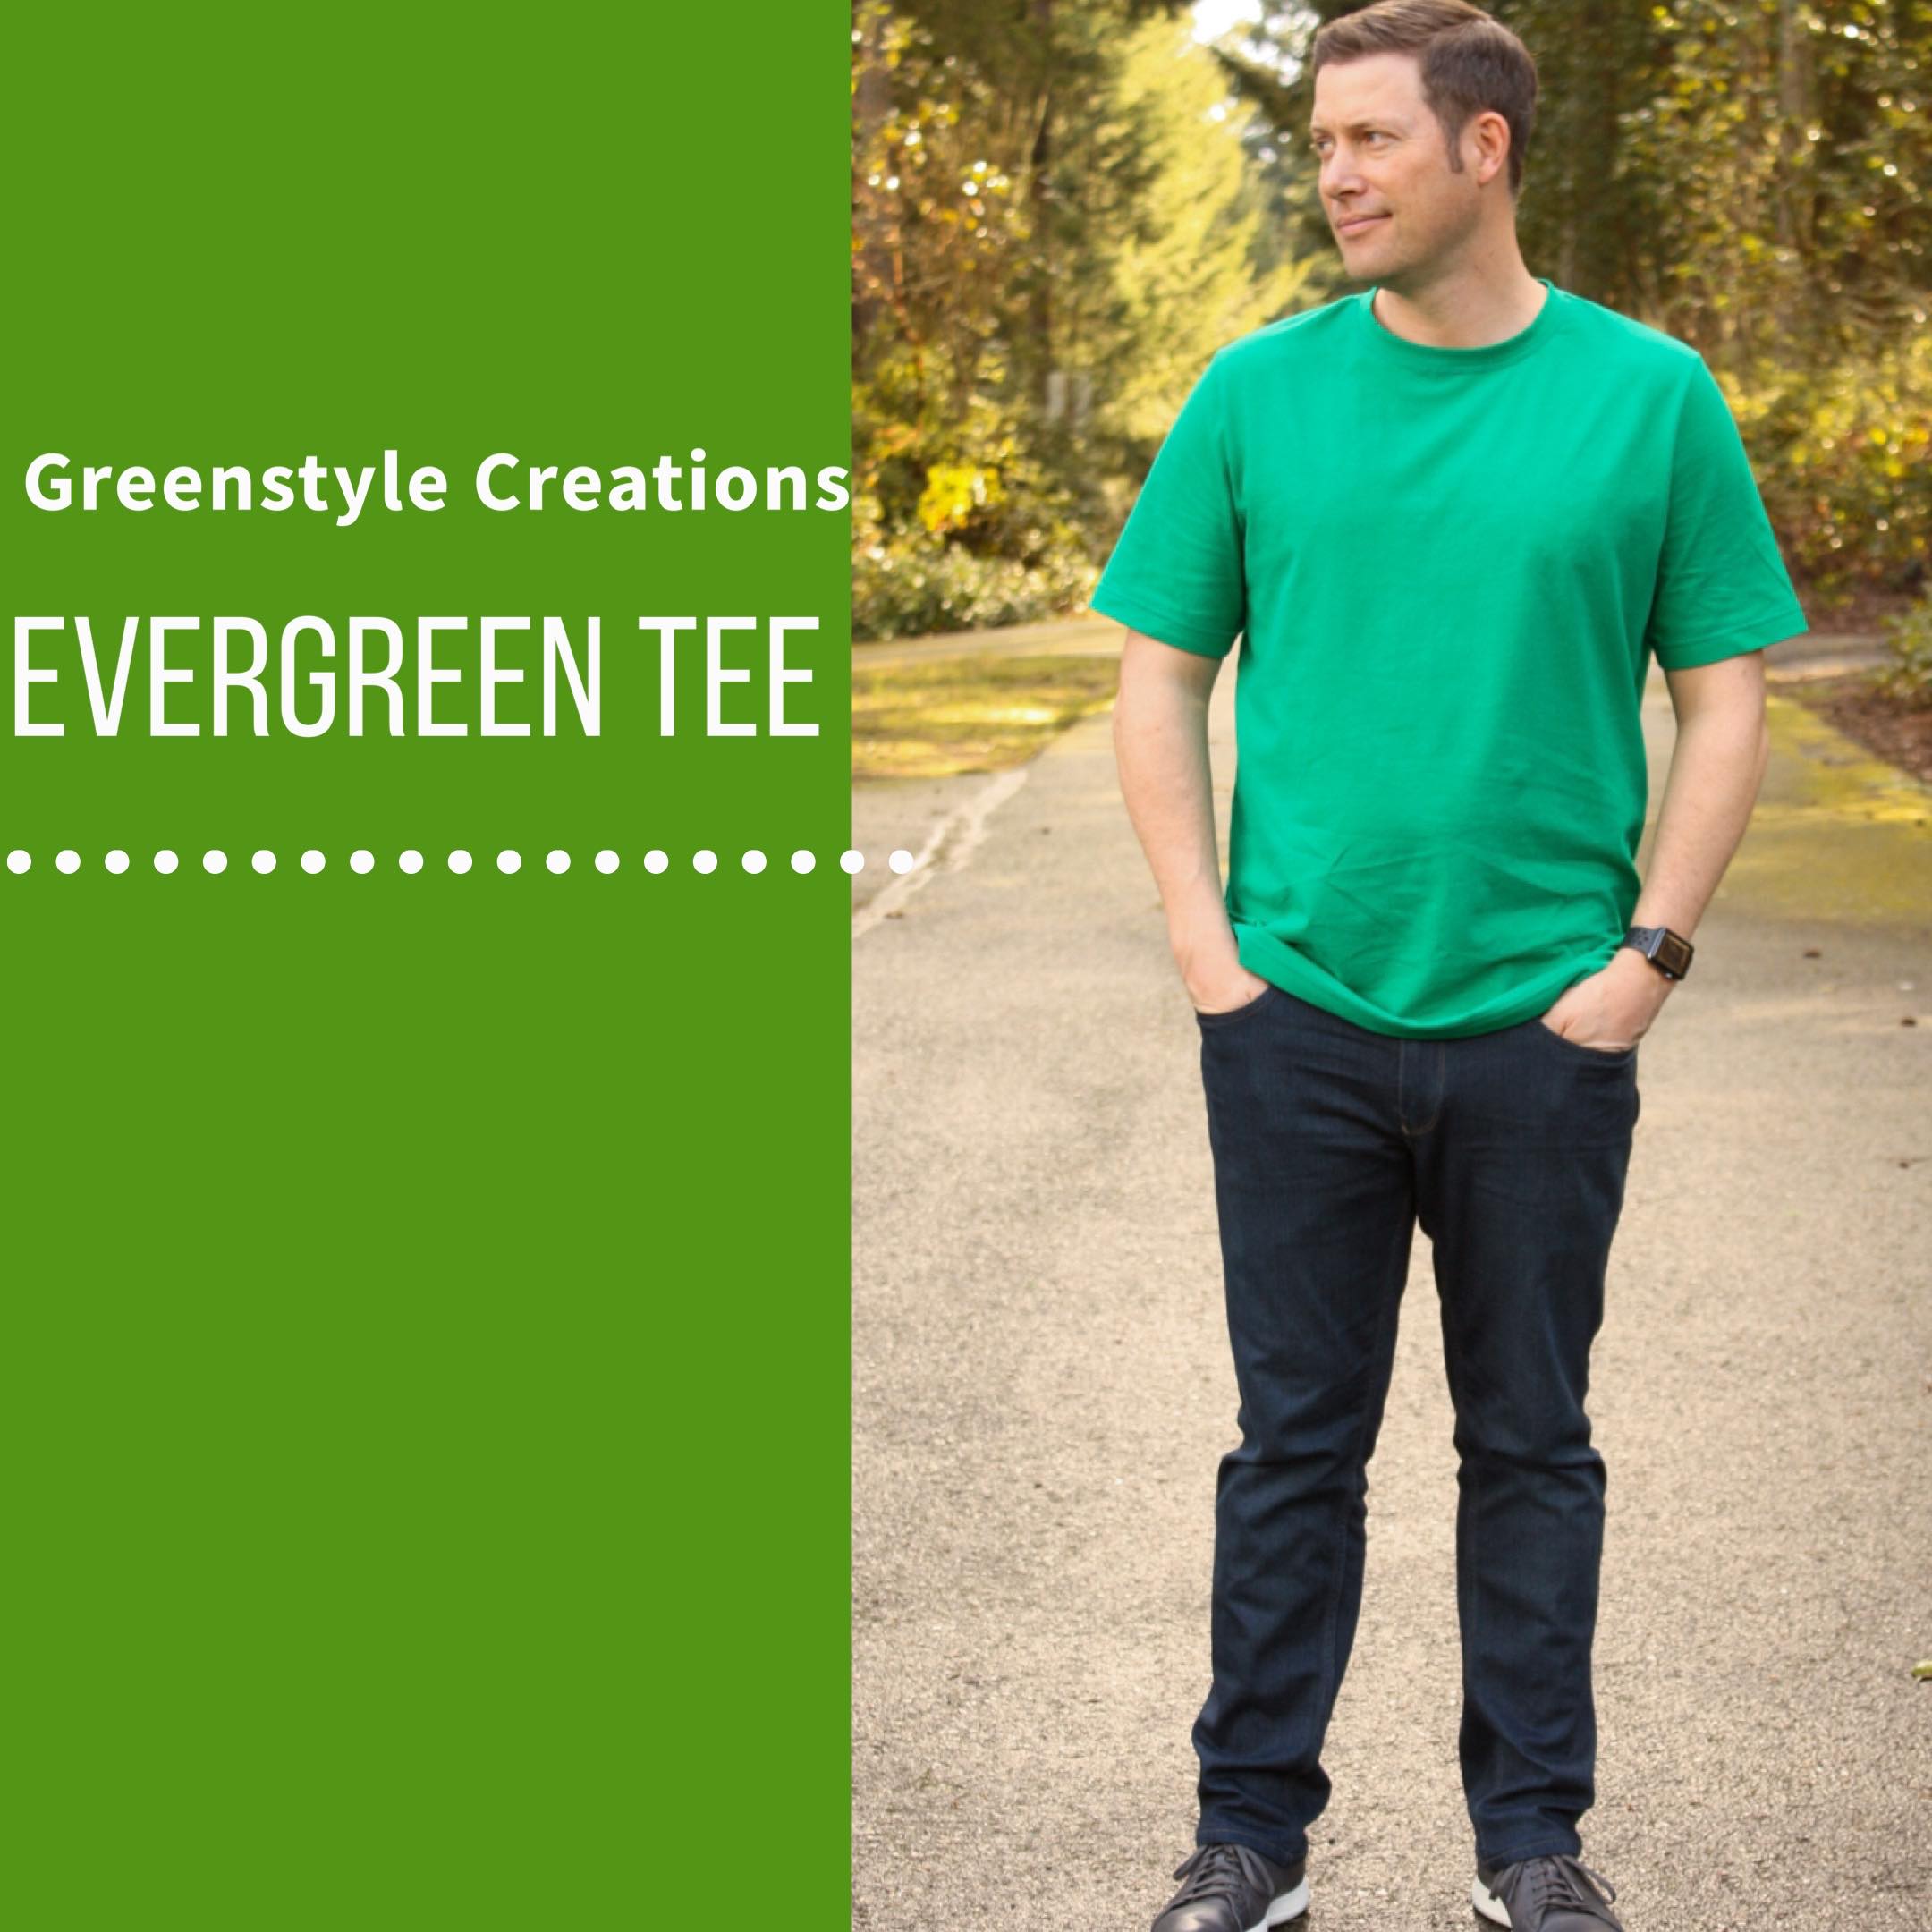 New Pattern Release: The Evergreen Tee